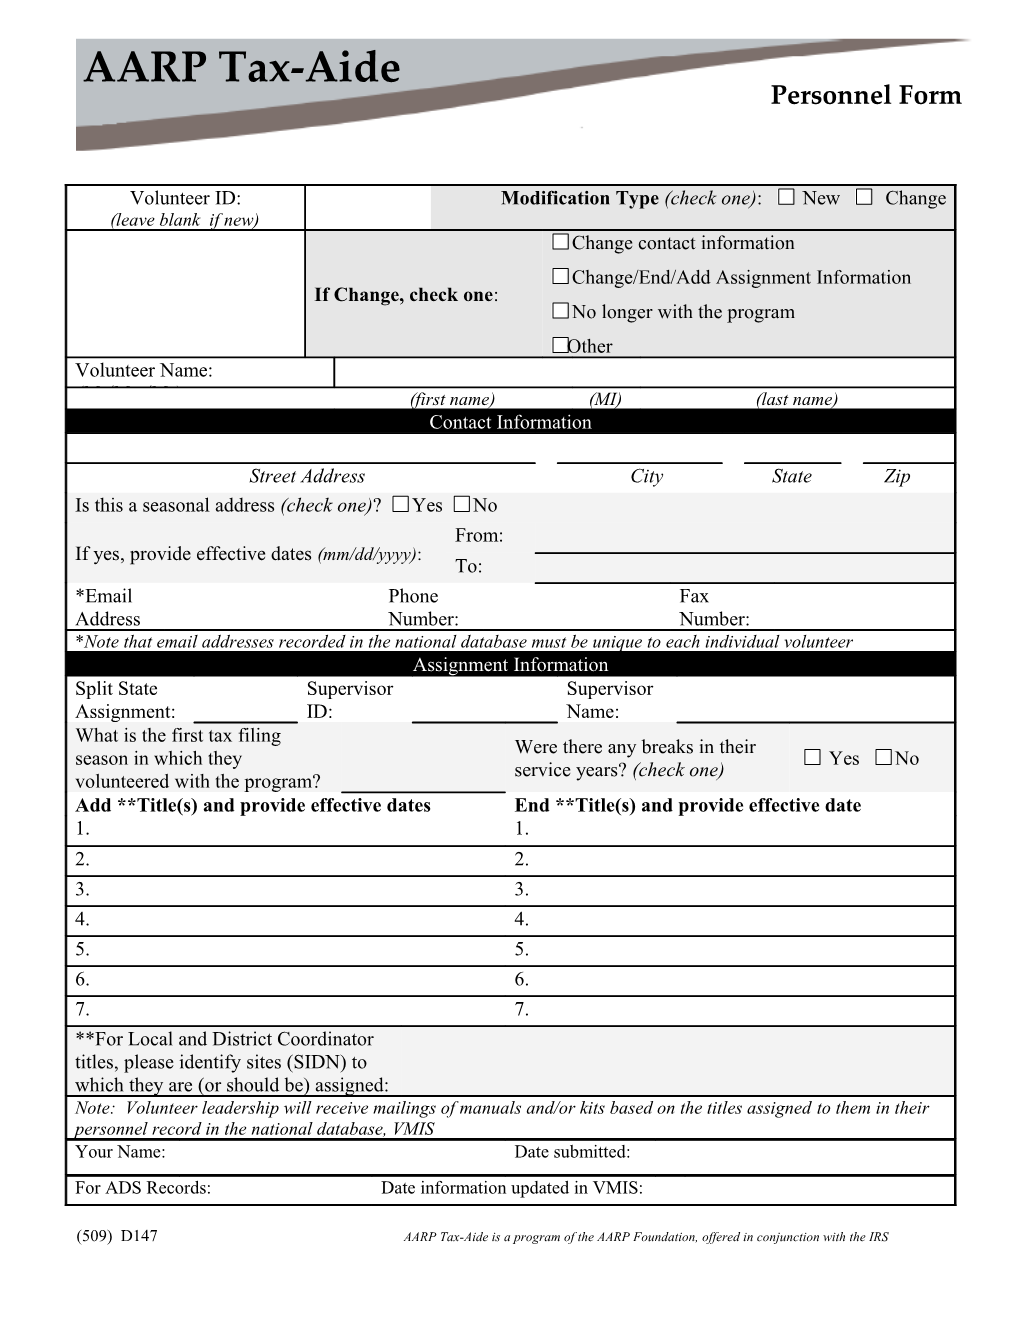 Aarp Tax-Aide Personnel Form